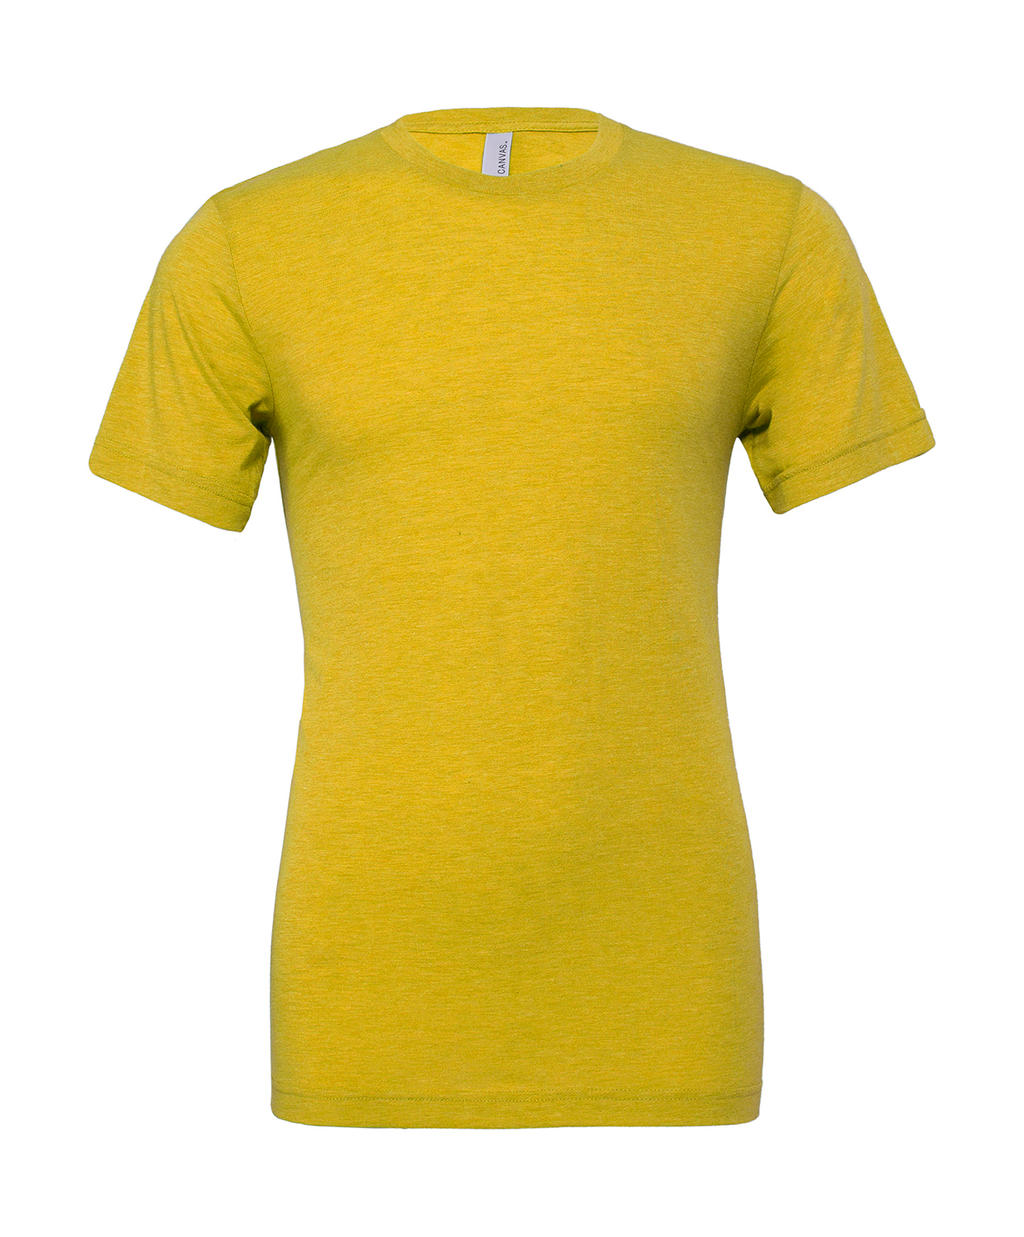  Unisex Triblend Short Sleeve Tee in Farbe Yellow Gold Triblend